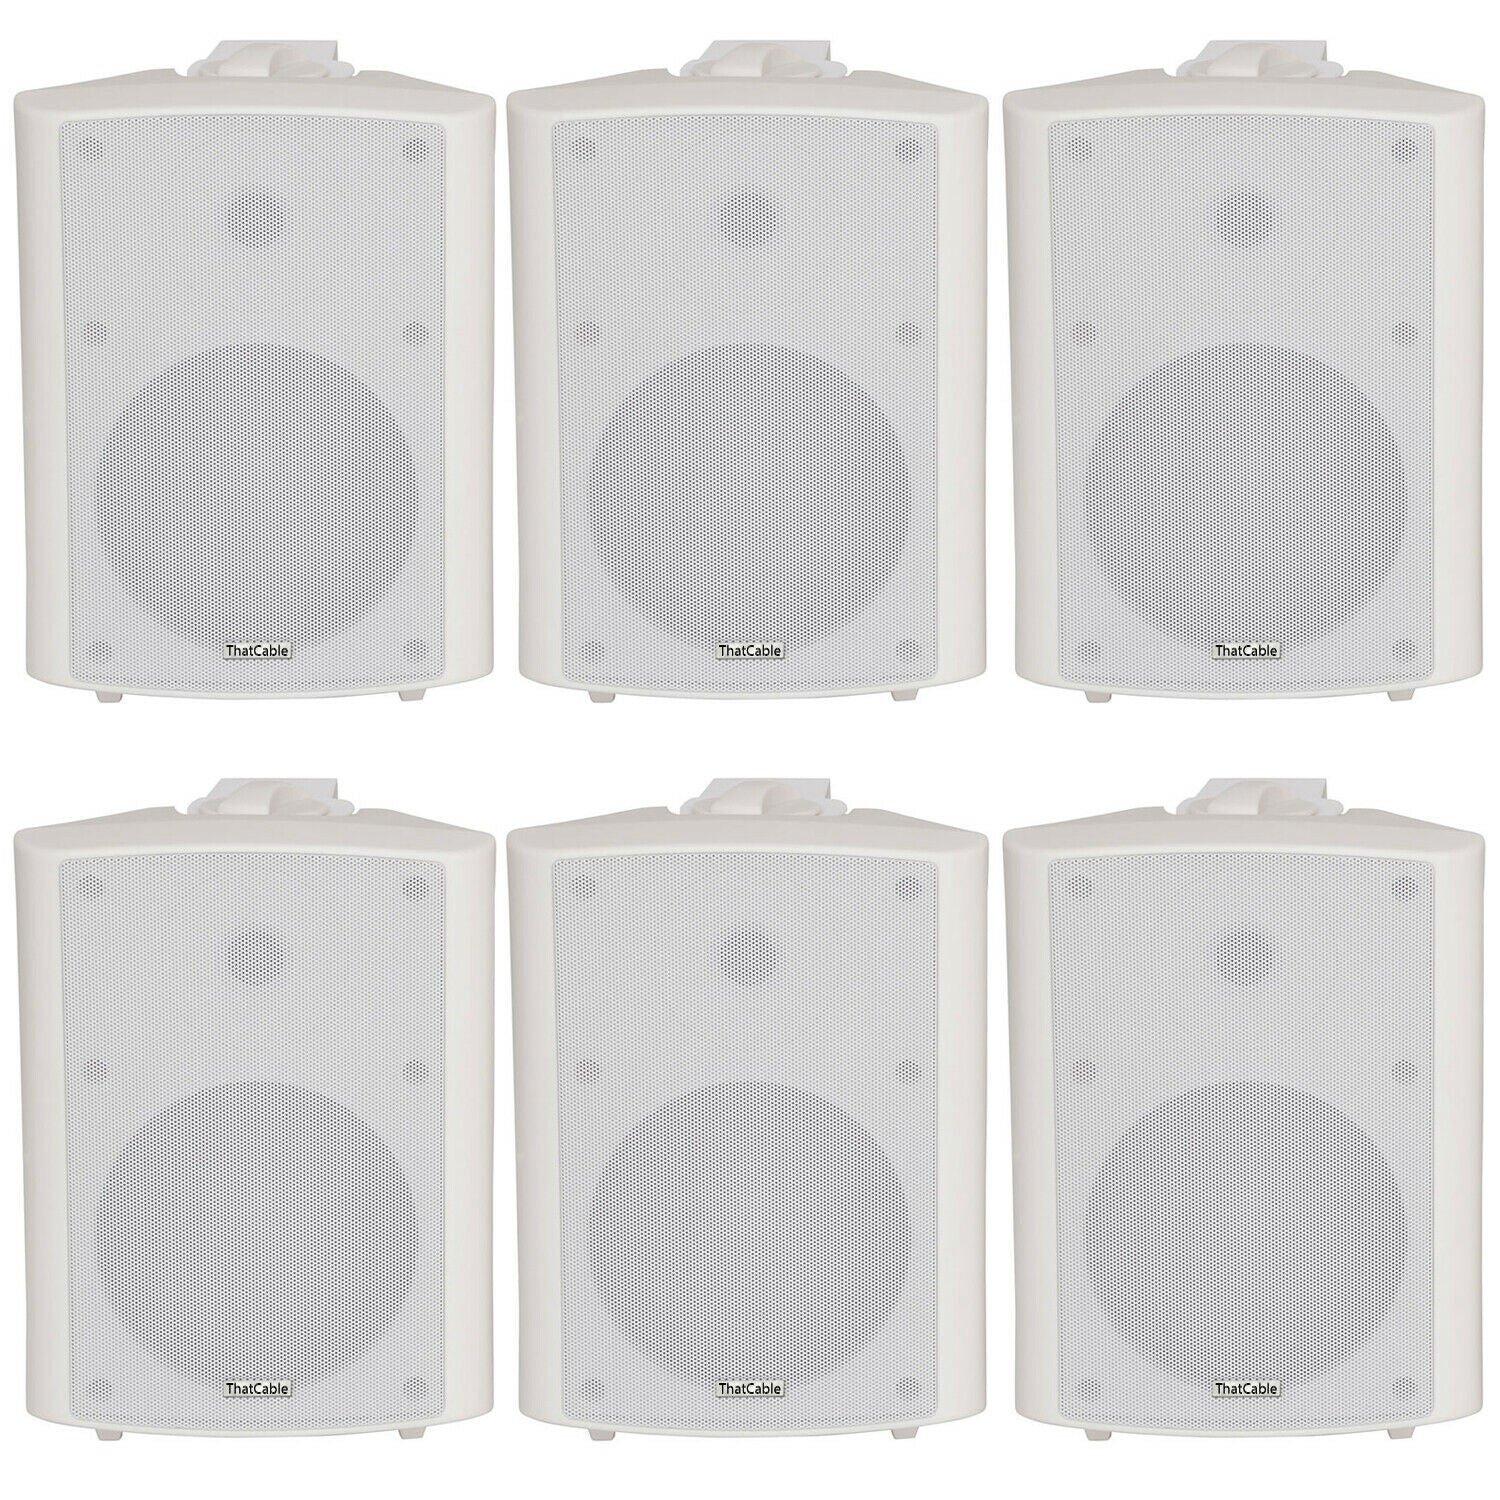 6x 120W White Wall Mounted Stereo Speakers 6.5